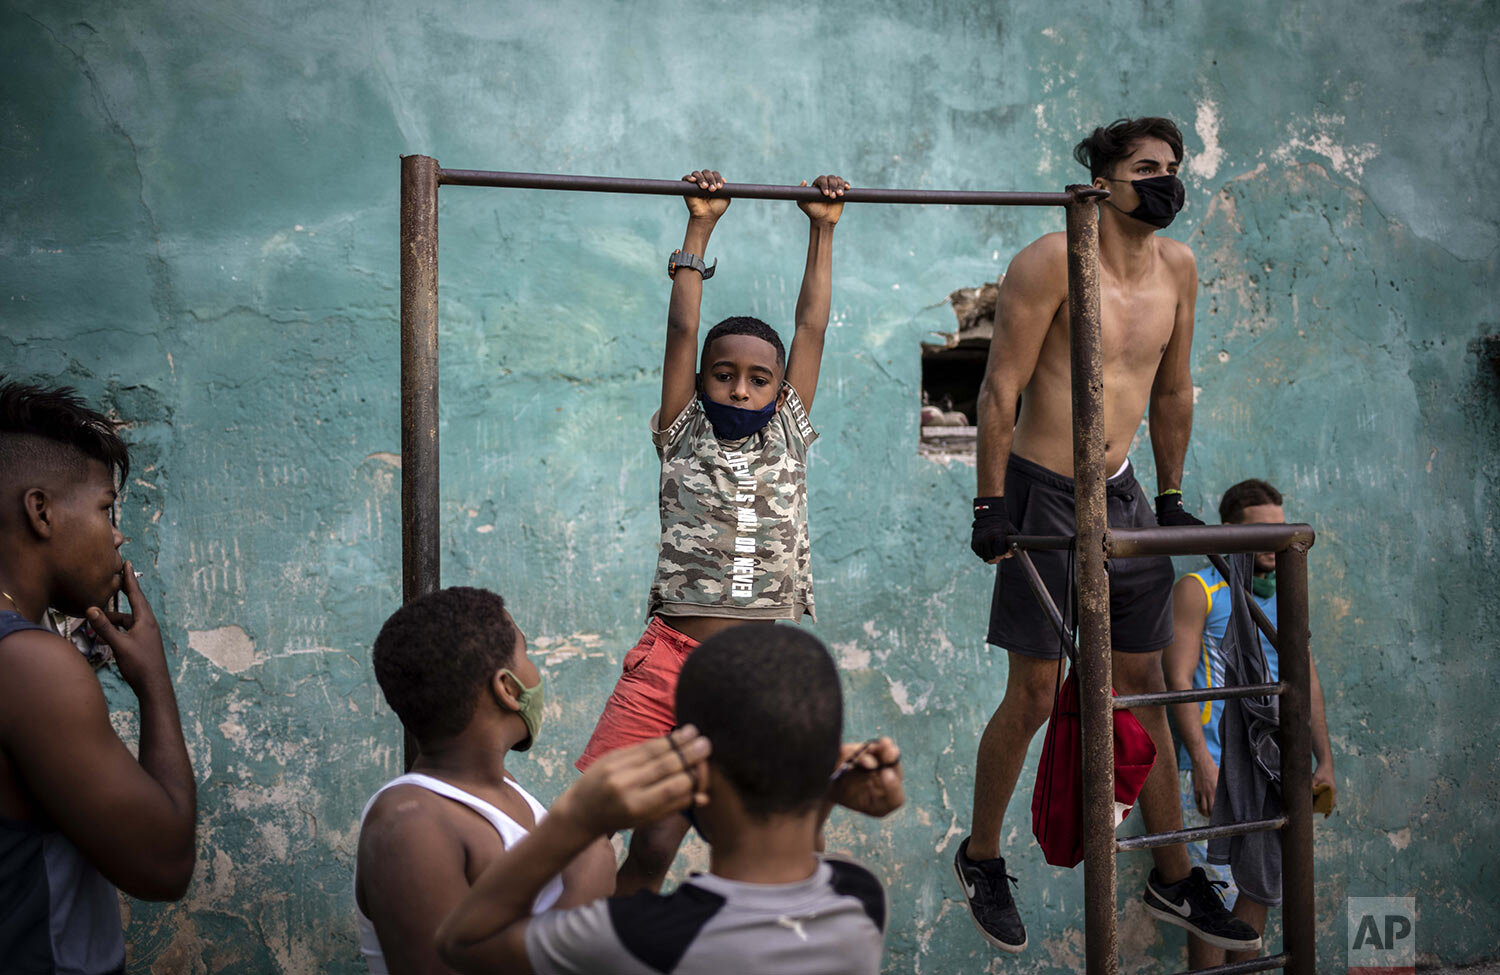  Youths exercise at a street gym in Havana, Cuba, Monday, Dec. 21, 2020, during the COVID-19 pandemic. (AP Photo/Ramon Espinosa) 